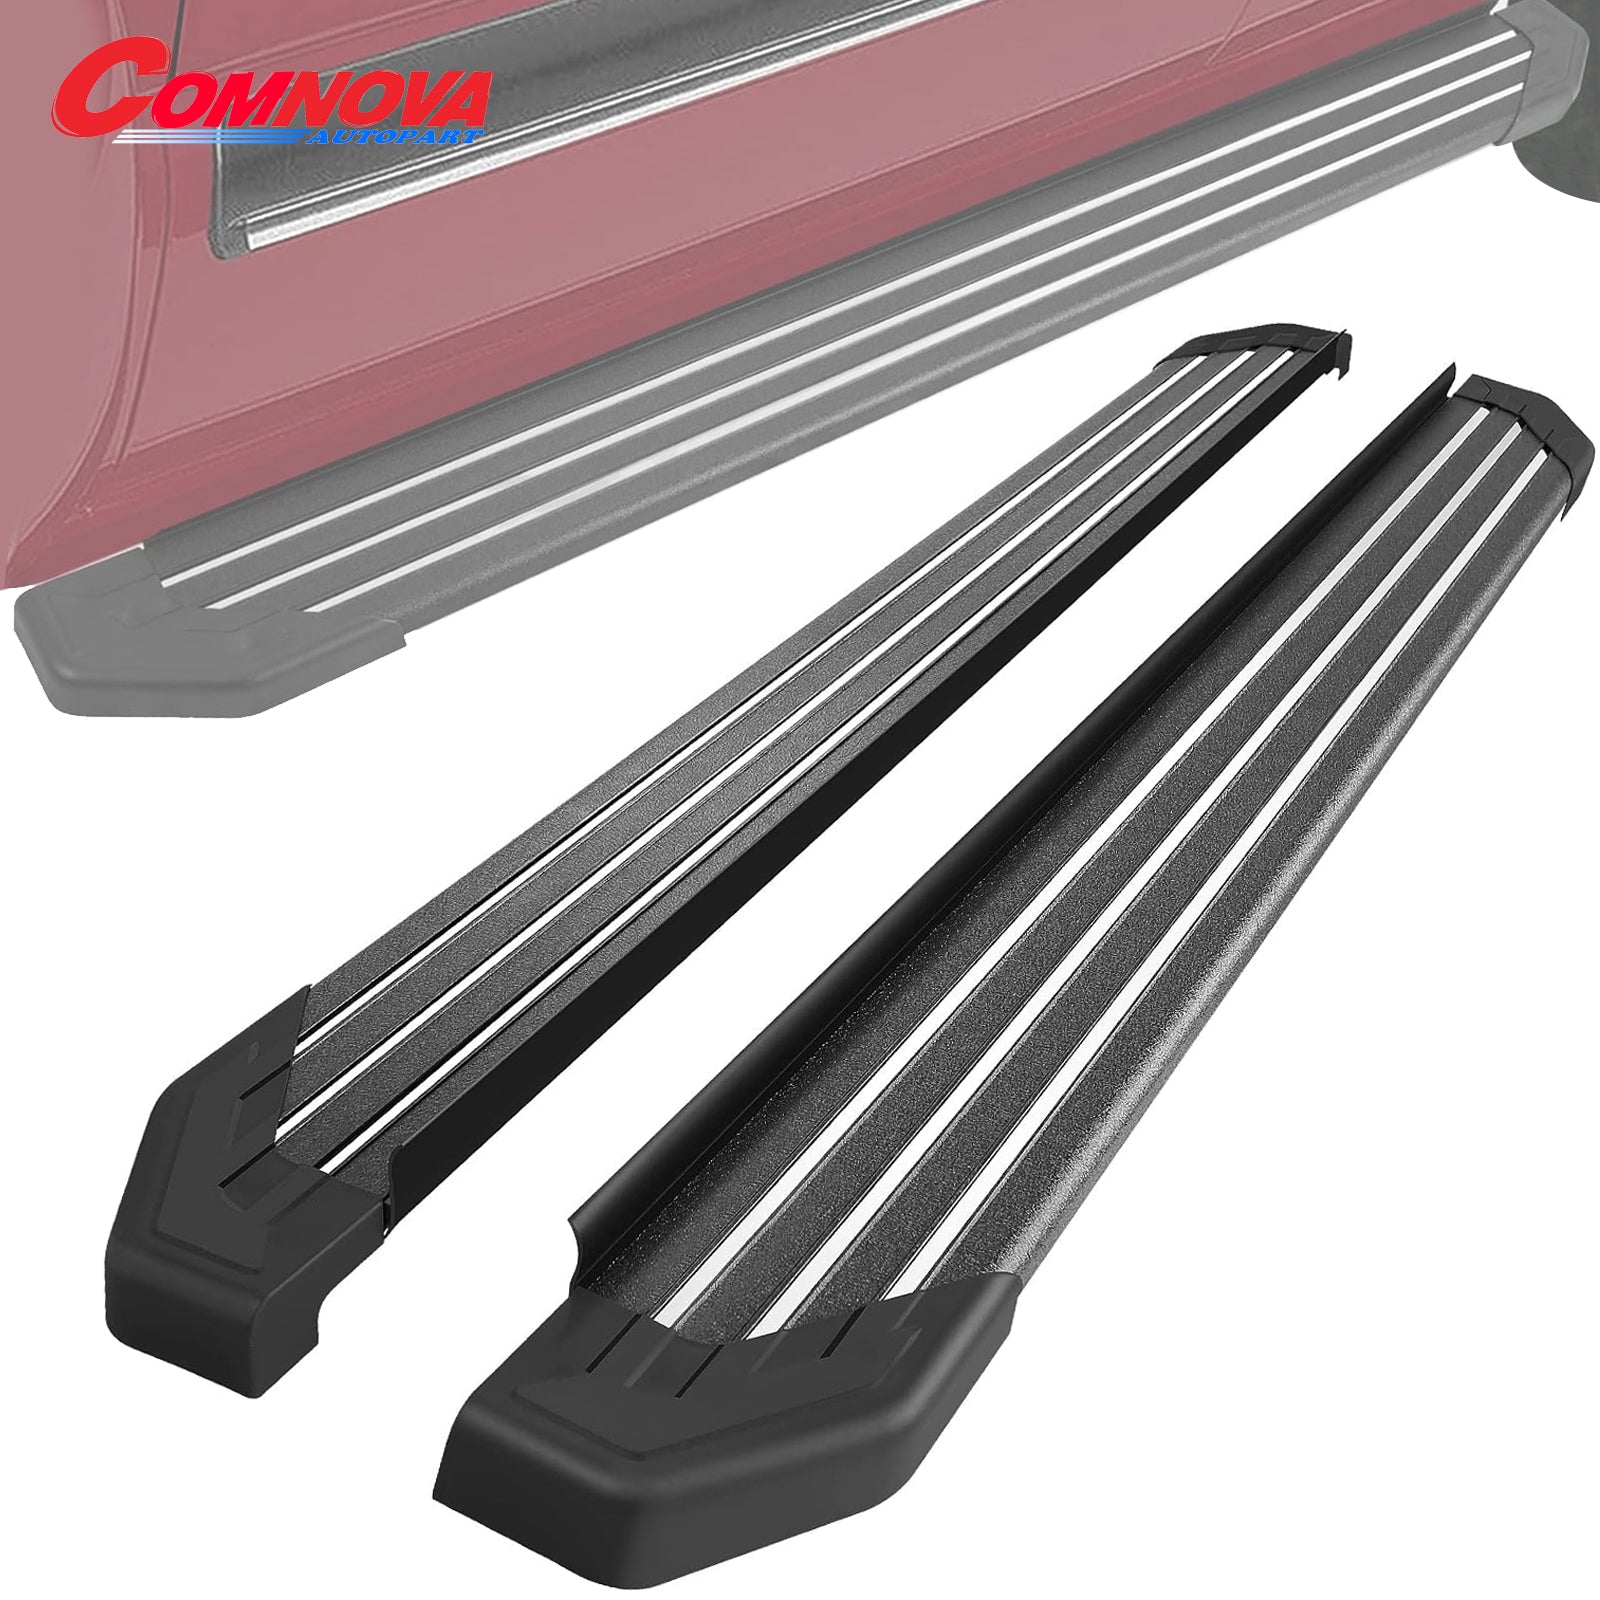 5.5Inch Aluminum Running Boards Compatible with Toyota 4Runner 2010-2023 Limited & 2010-2013 SR5 & 2020-2022 Nightshade Edition & 2022-2023 TRD Sport. C73 Style. - COMNOVA AUTOPART